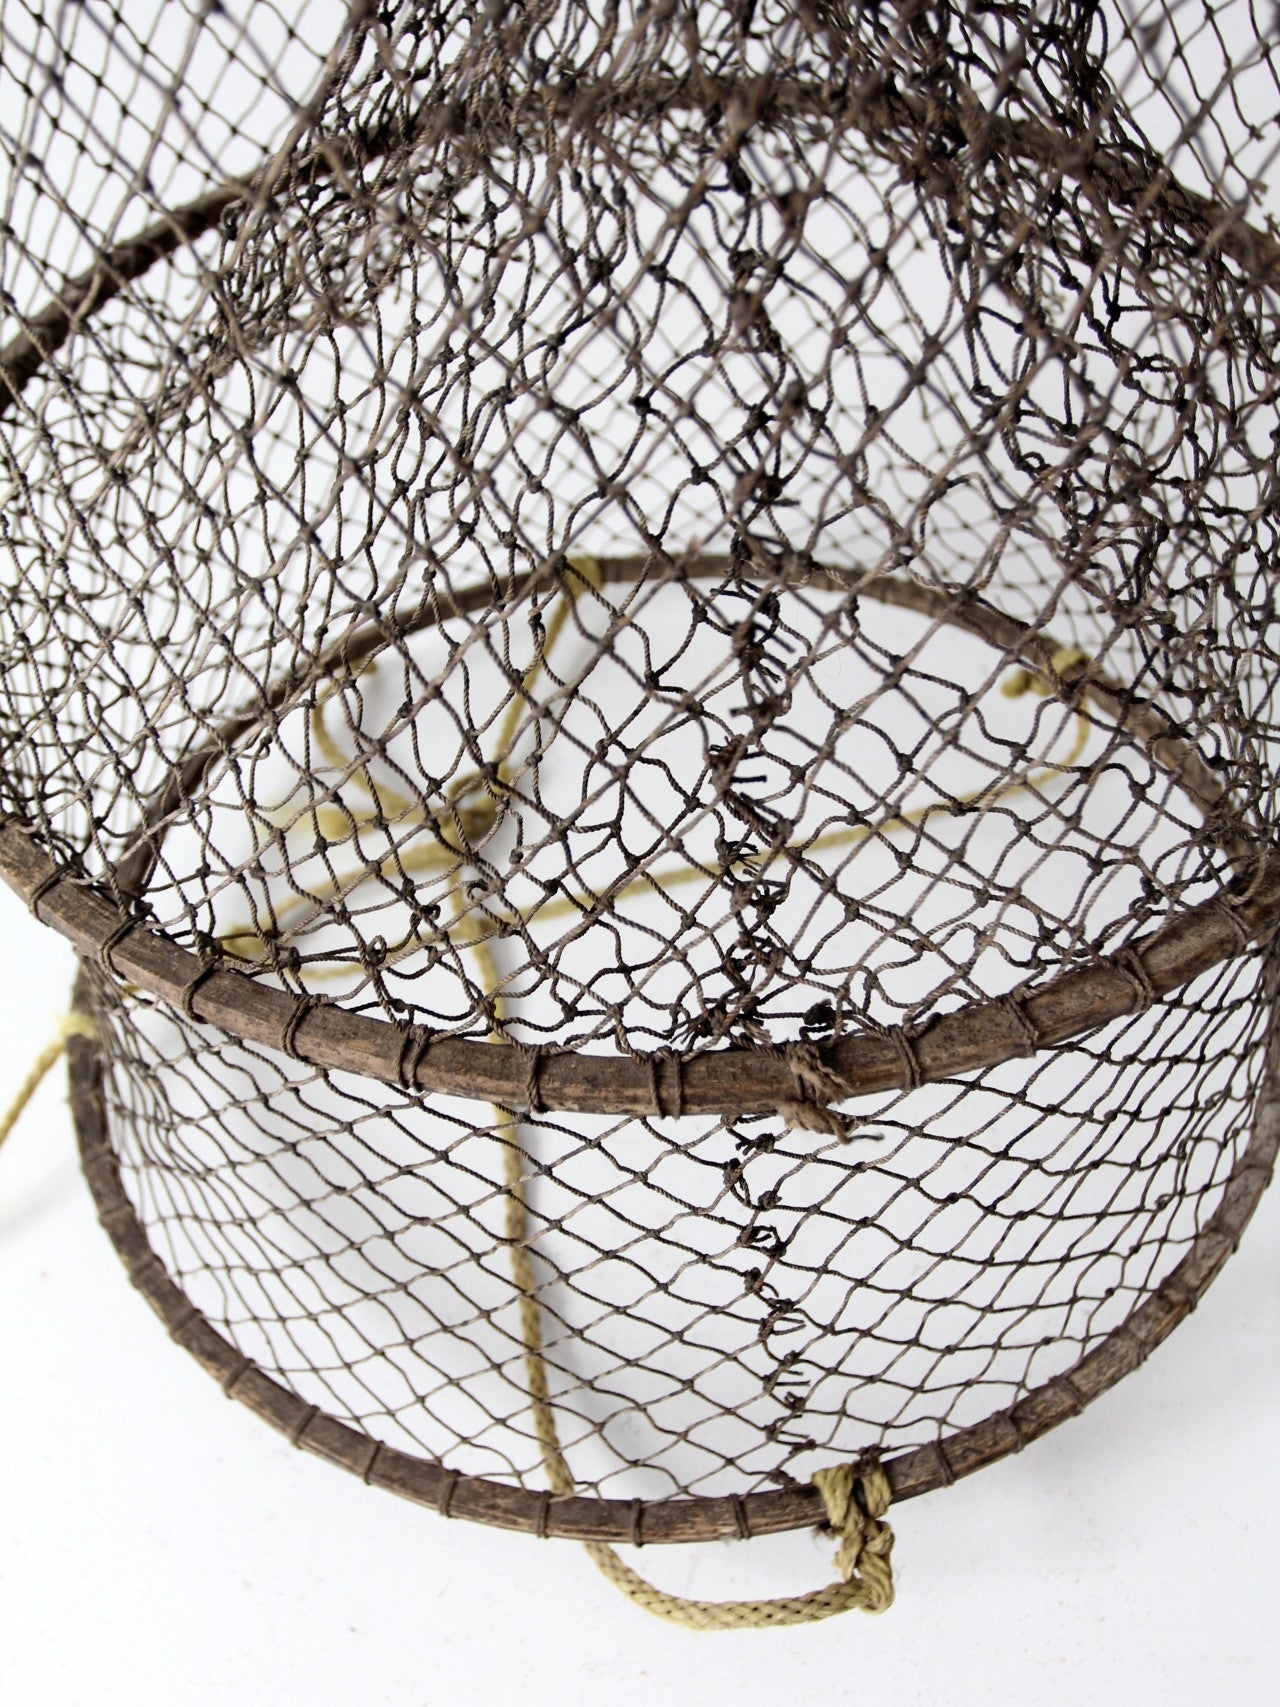 12 lb. Box of Used Fishing Net - Authentic Old Vintage Commercial Fish  Netting